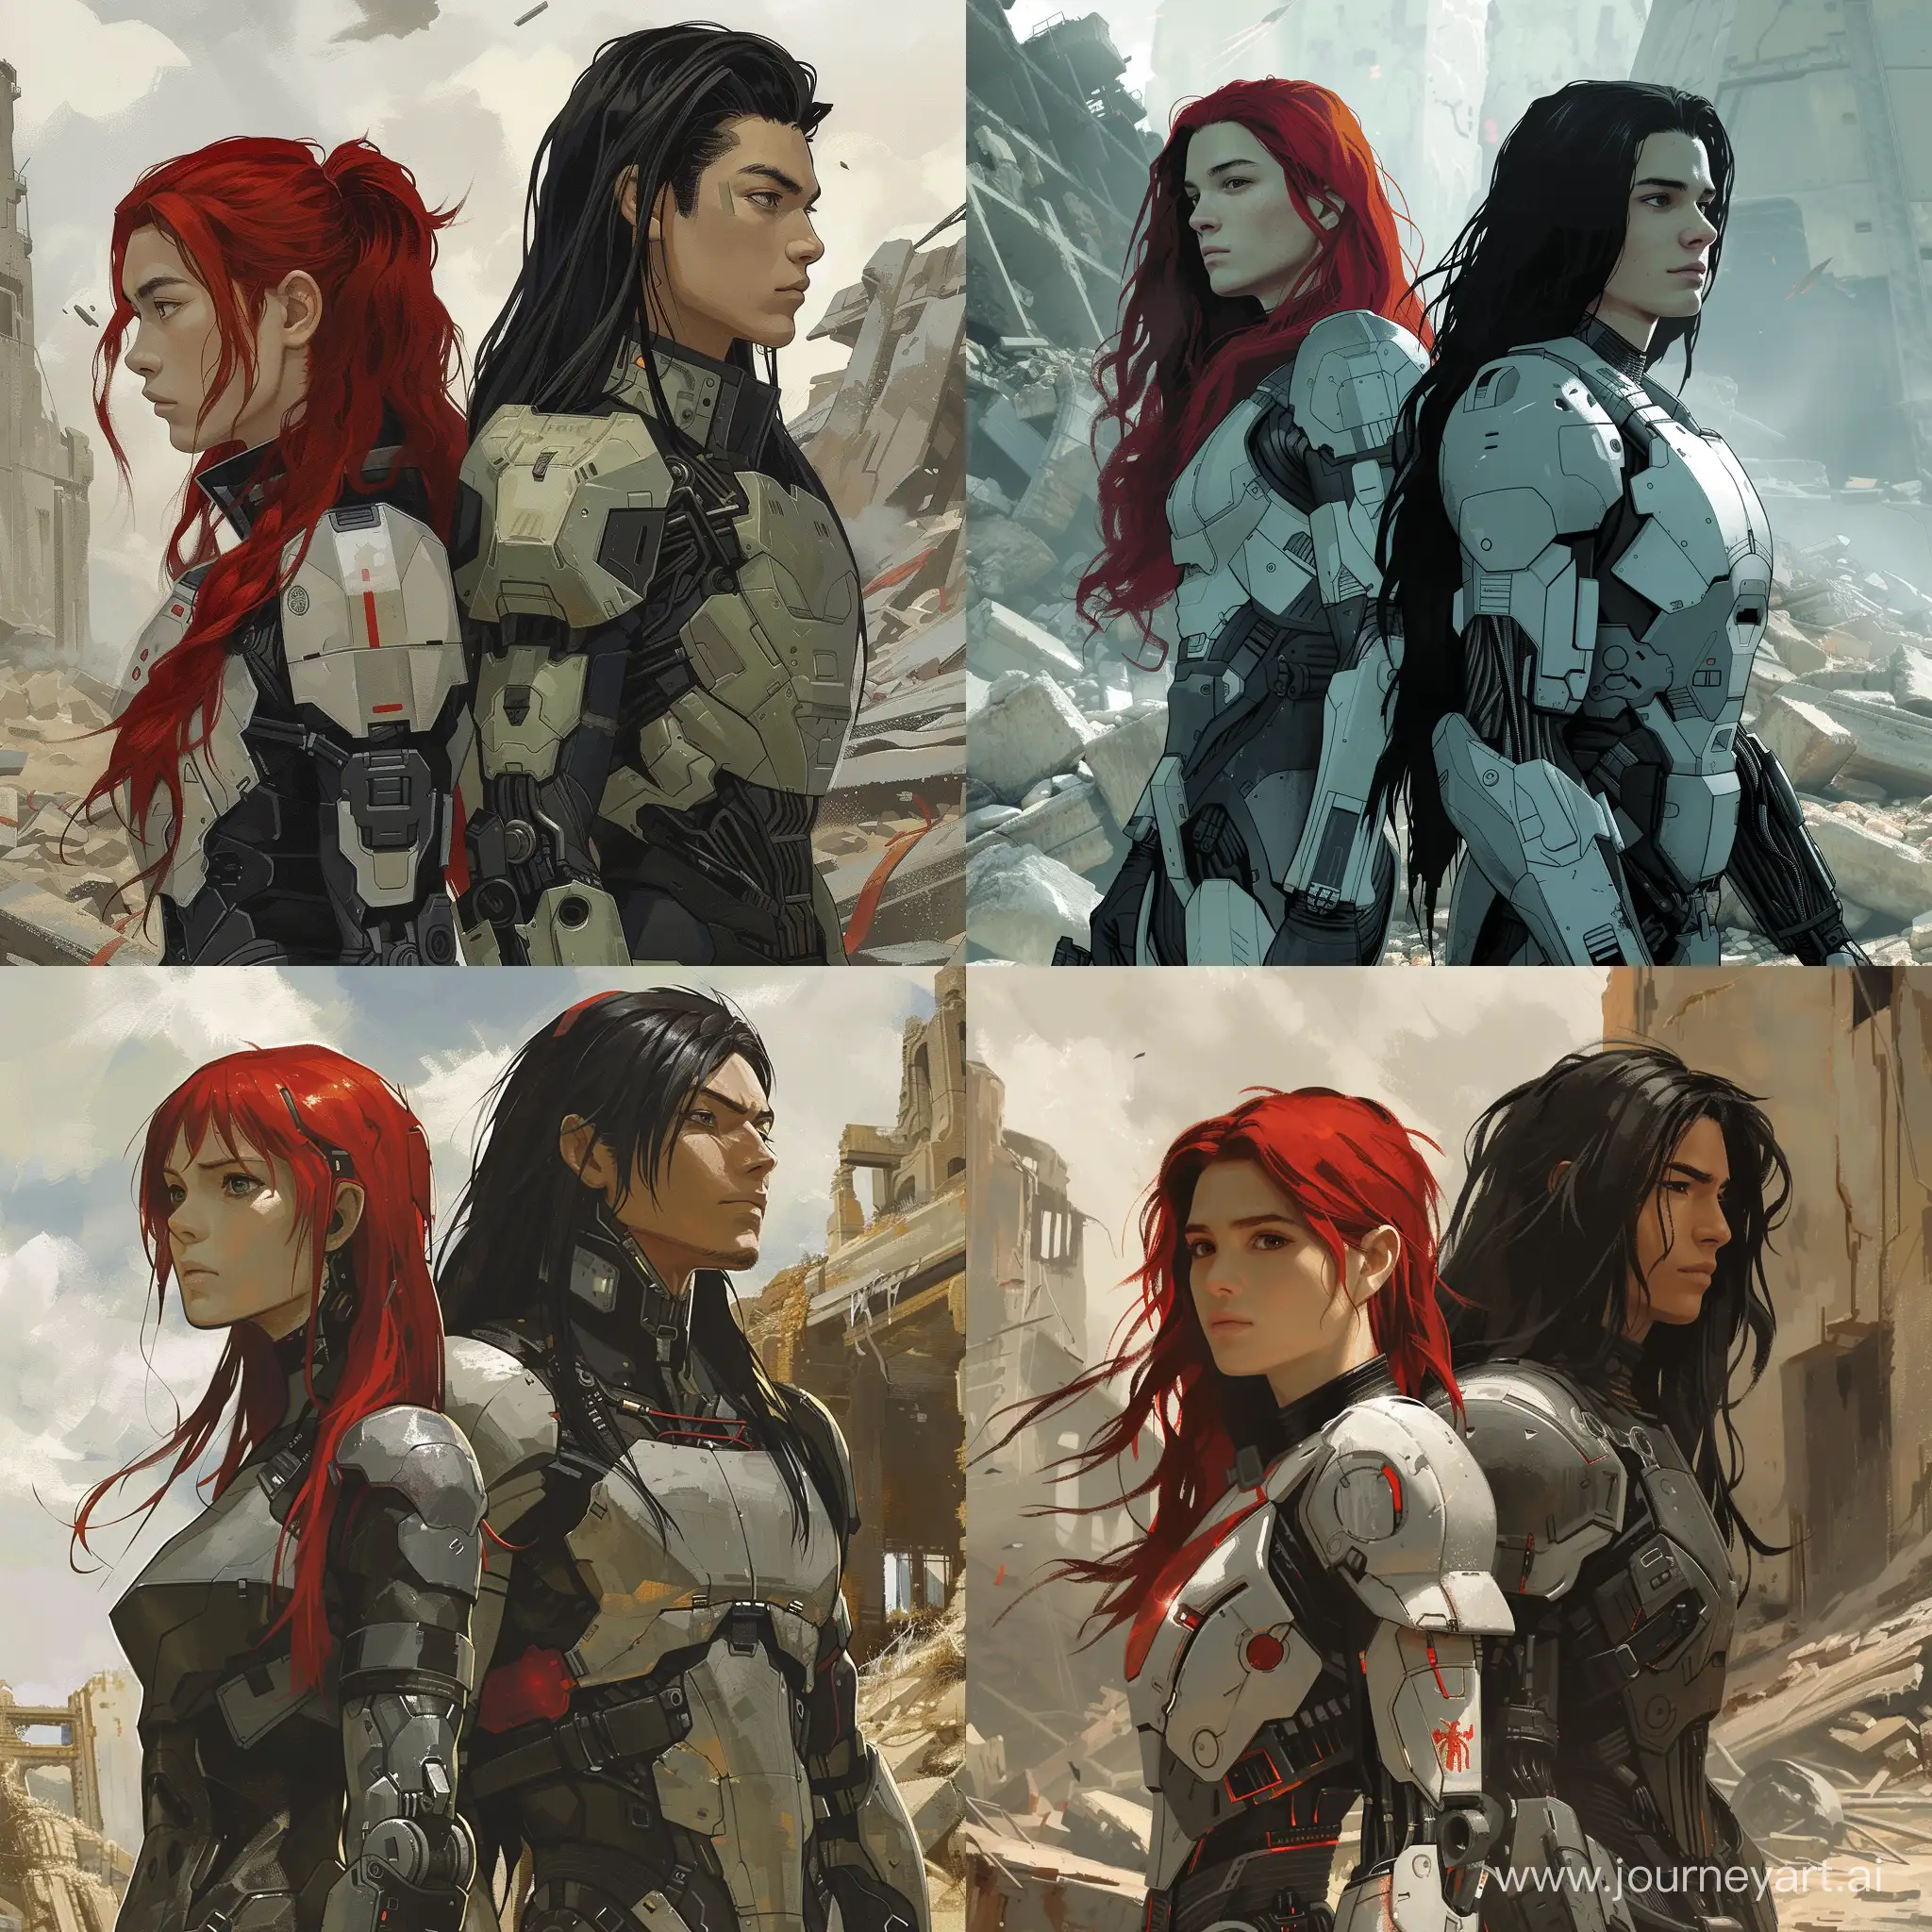 RedHaired-Girl-and-LongHaired-Man-in-Futuristic-Armor-Amidst-Distant-Ruins